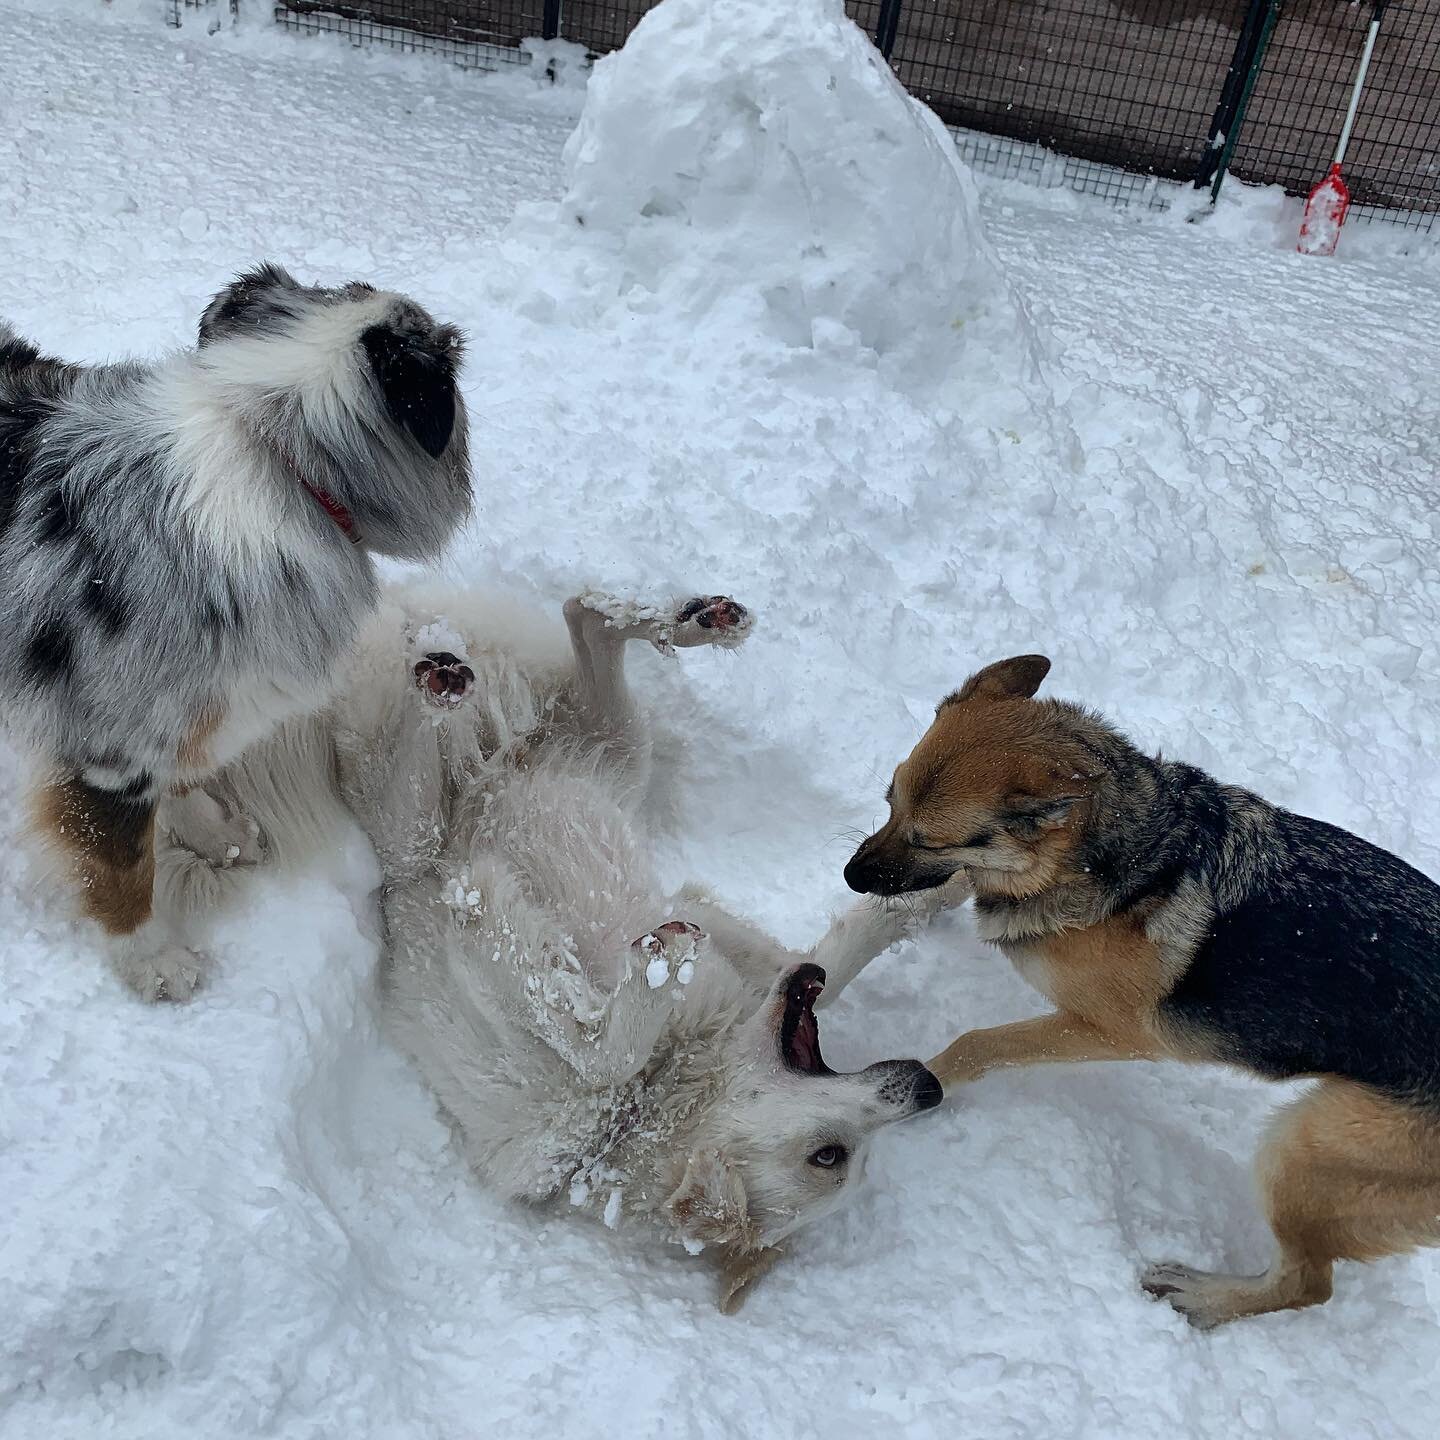 Snow dogs- happy dogs!  #peacelovepetcare #steamboatdogs #steamboatdigsdogs